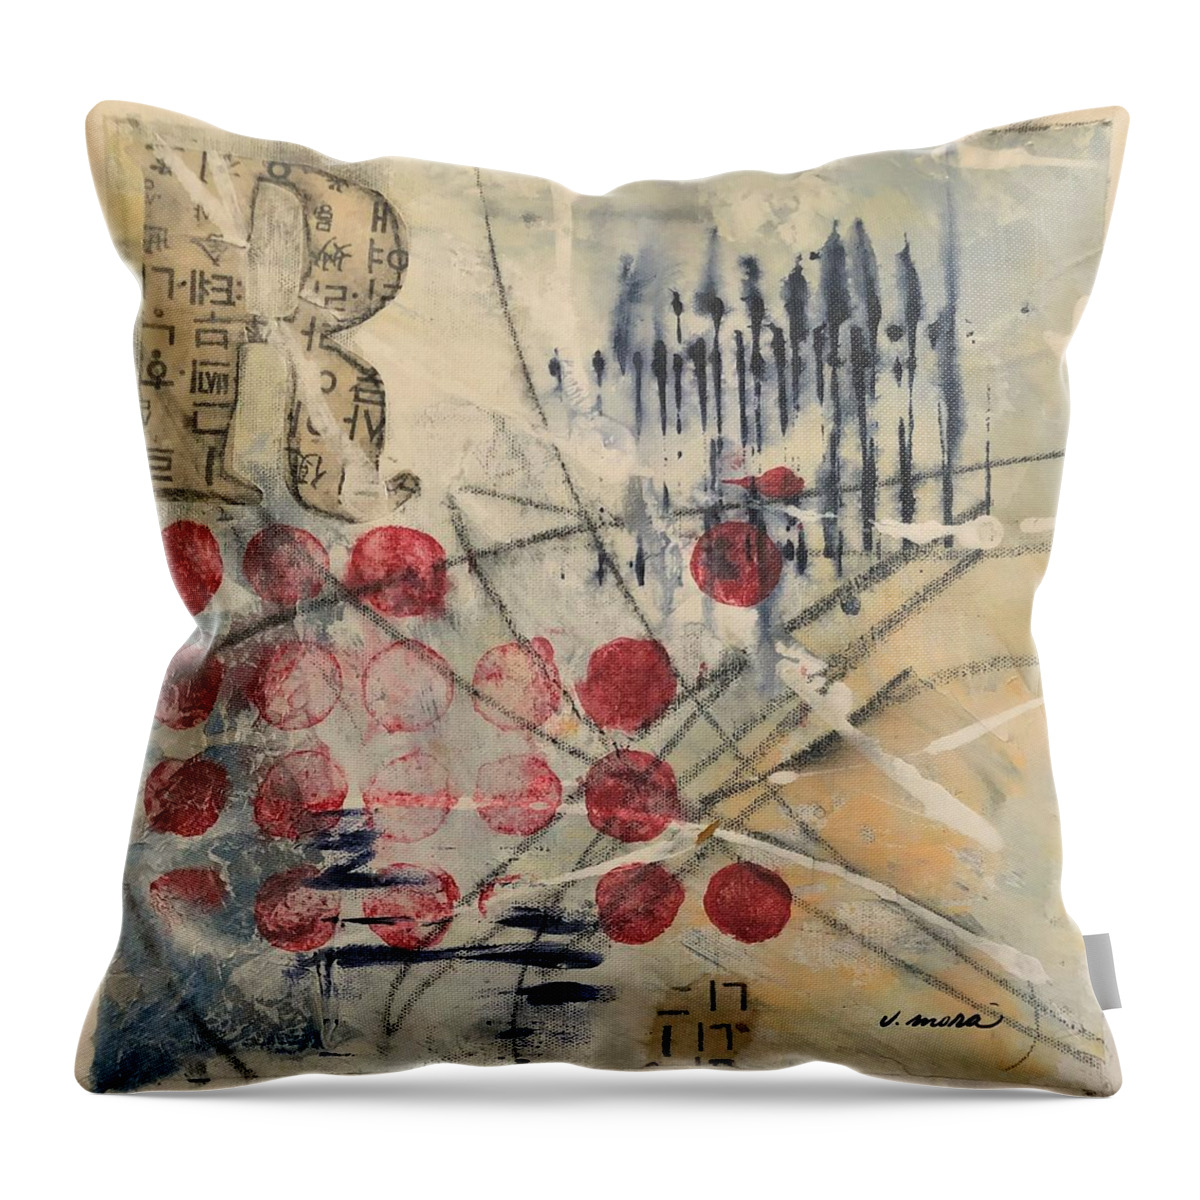 Abstract Throw Pillow featuring the painting Across Sand and Water No. 2 by Vivian Mora